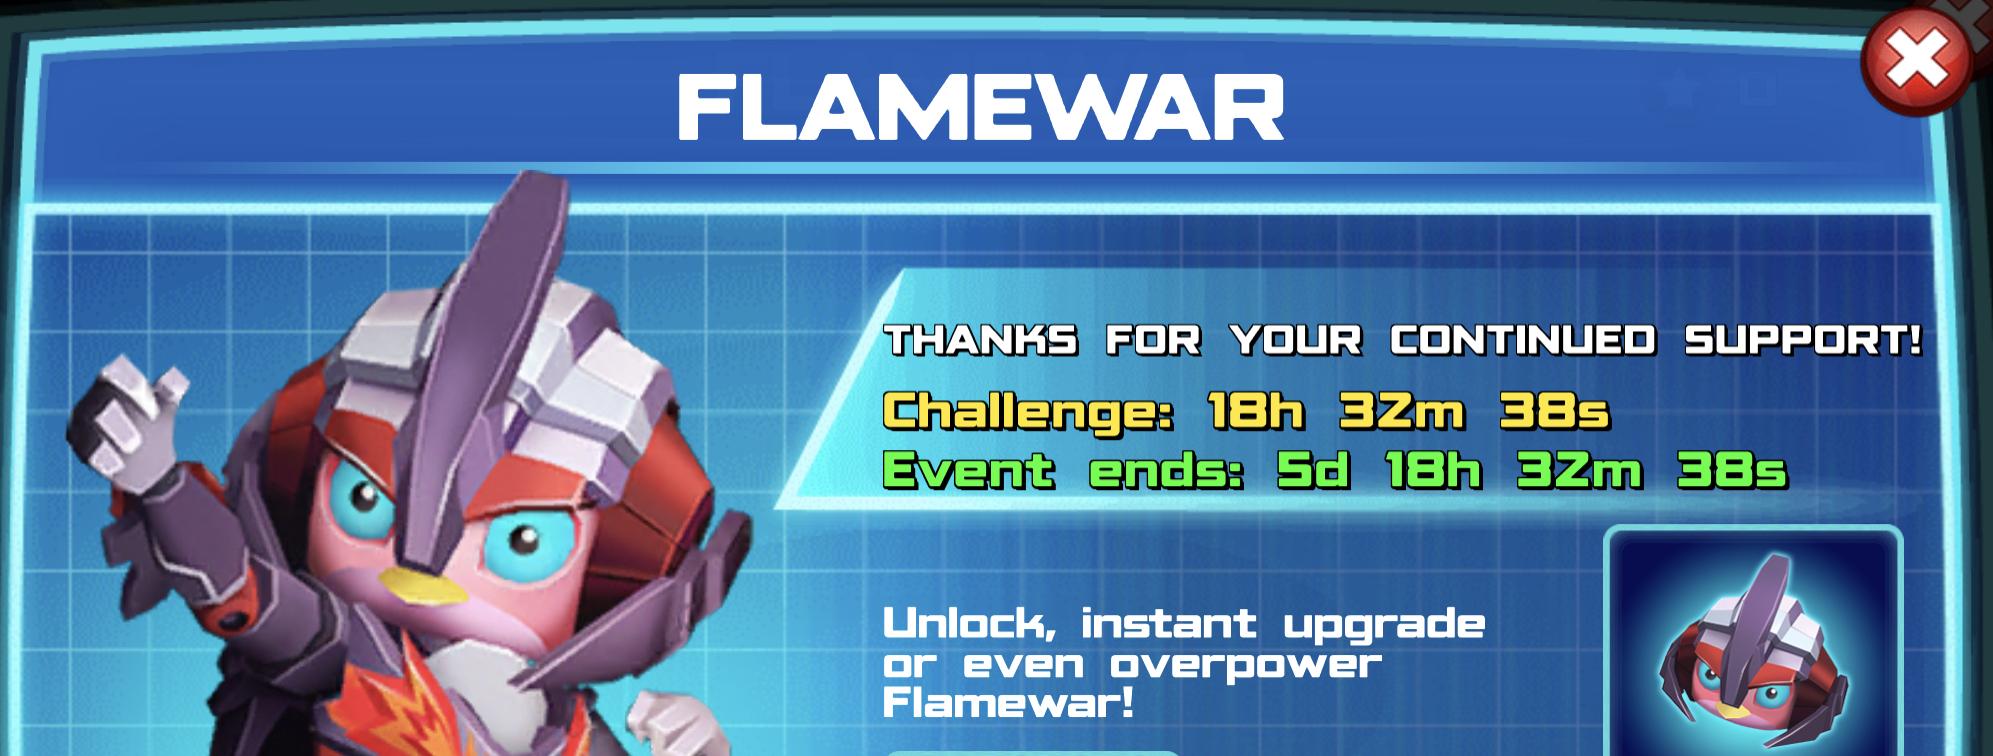 The event banner for Flamewar